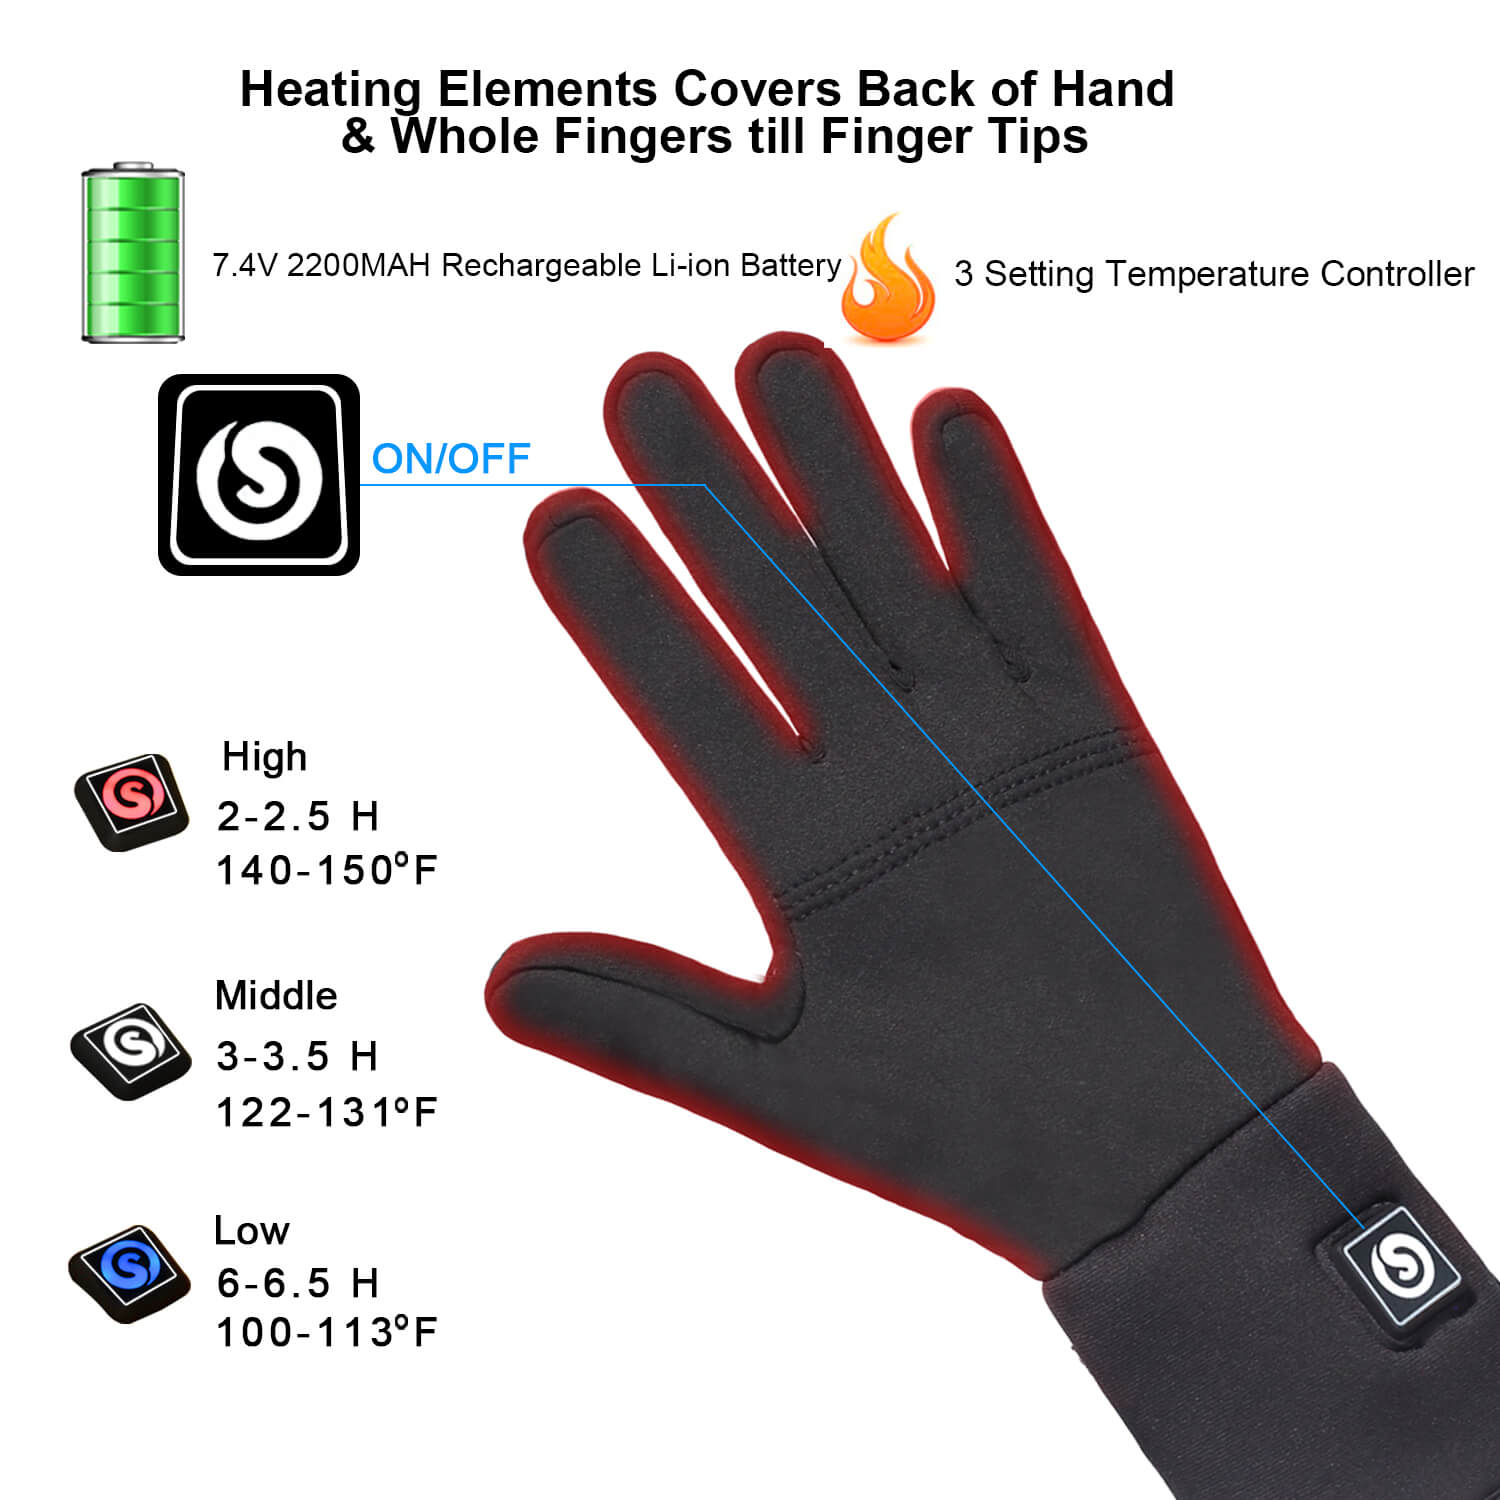 Savior Thin Hand Warmer Heated Gloves 7.4V Rechargeable Battery Powe